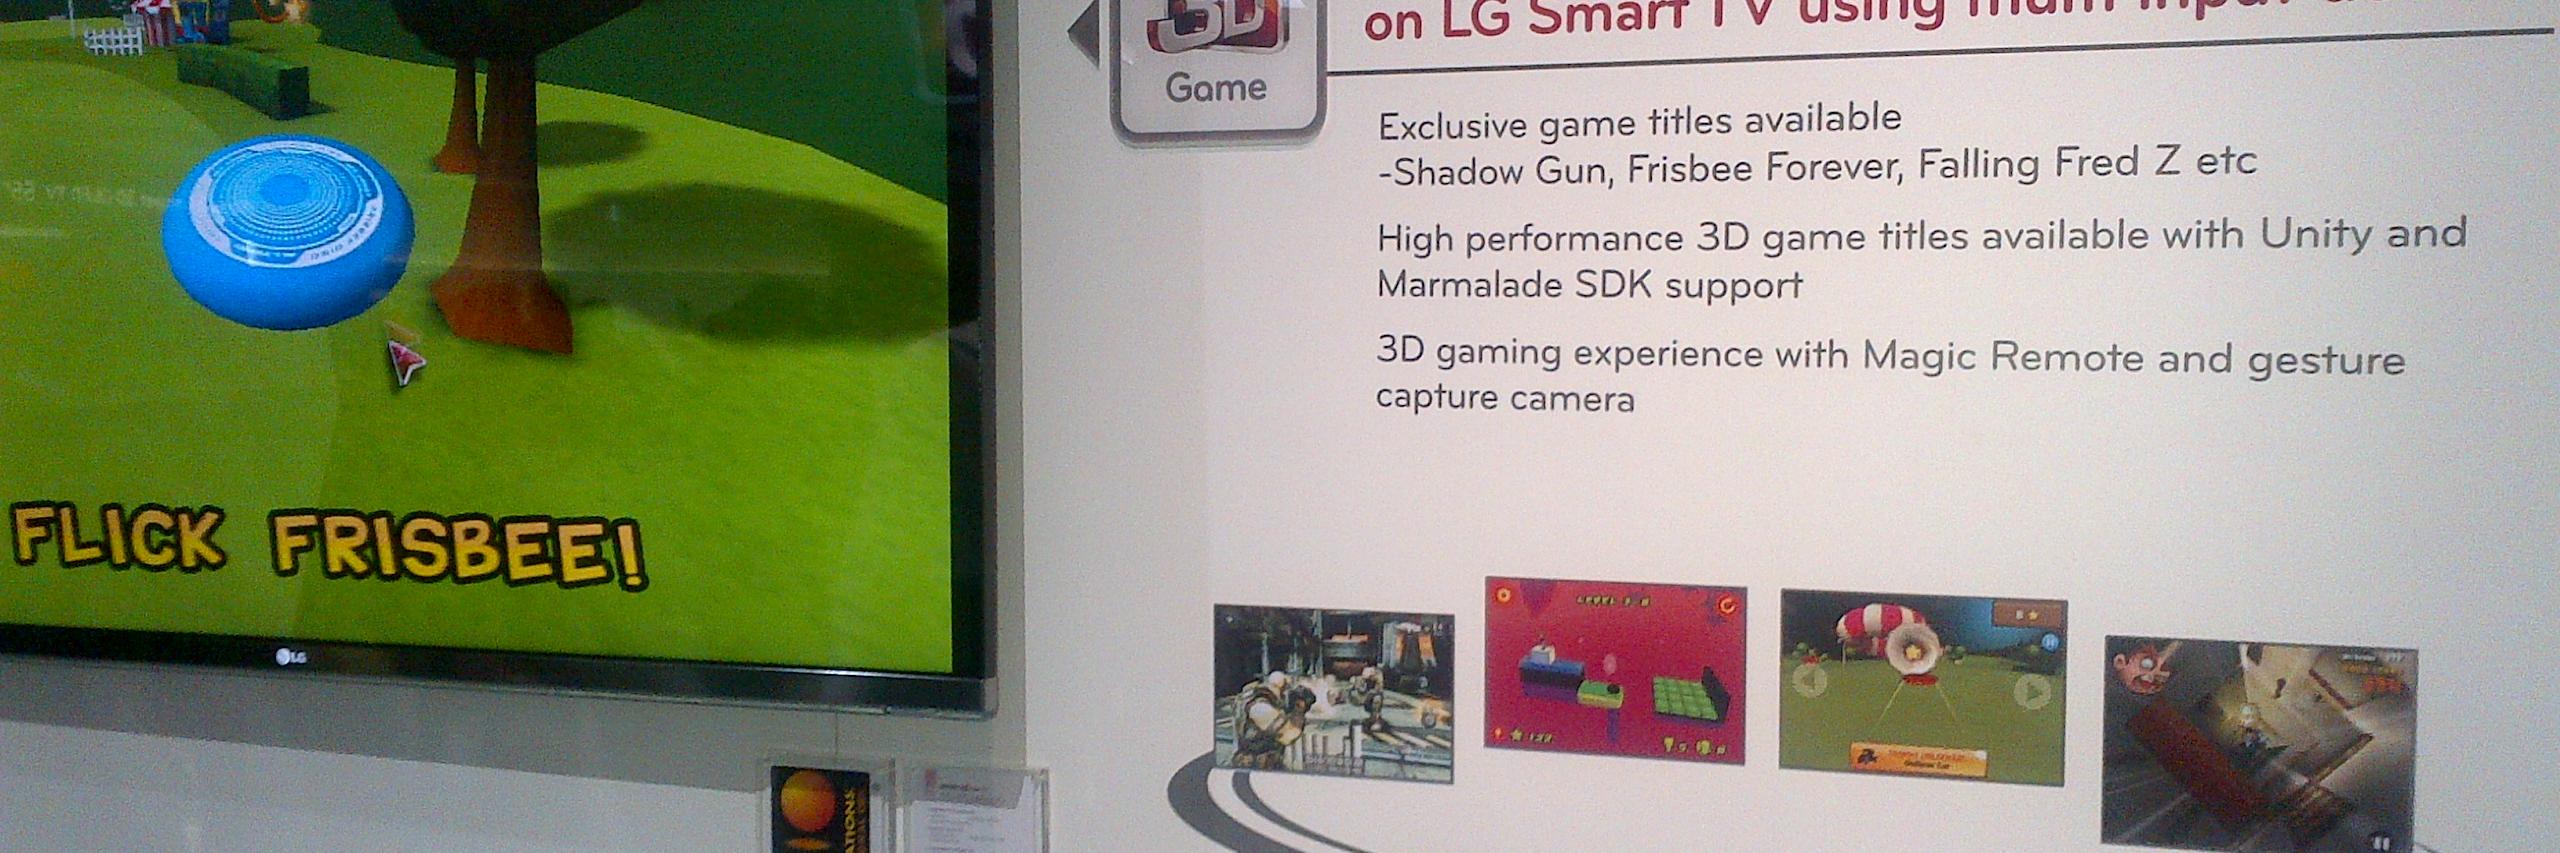 Frisbee Forever LG smart TV demo at CES 2012